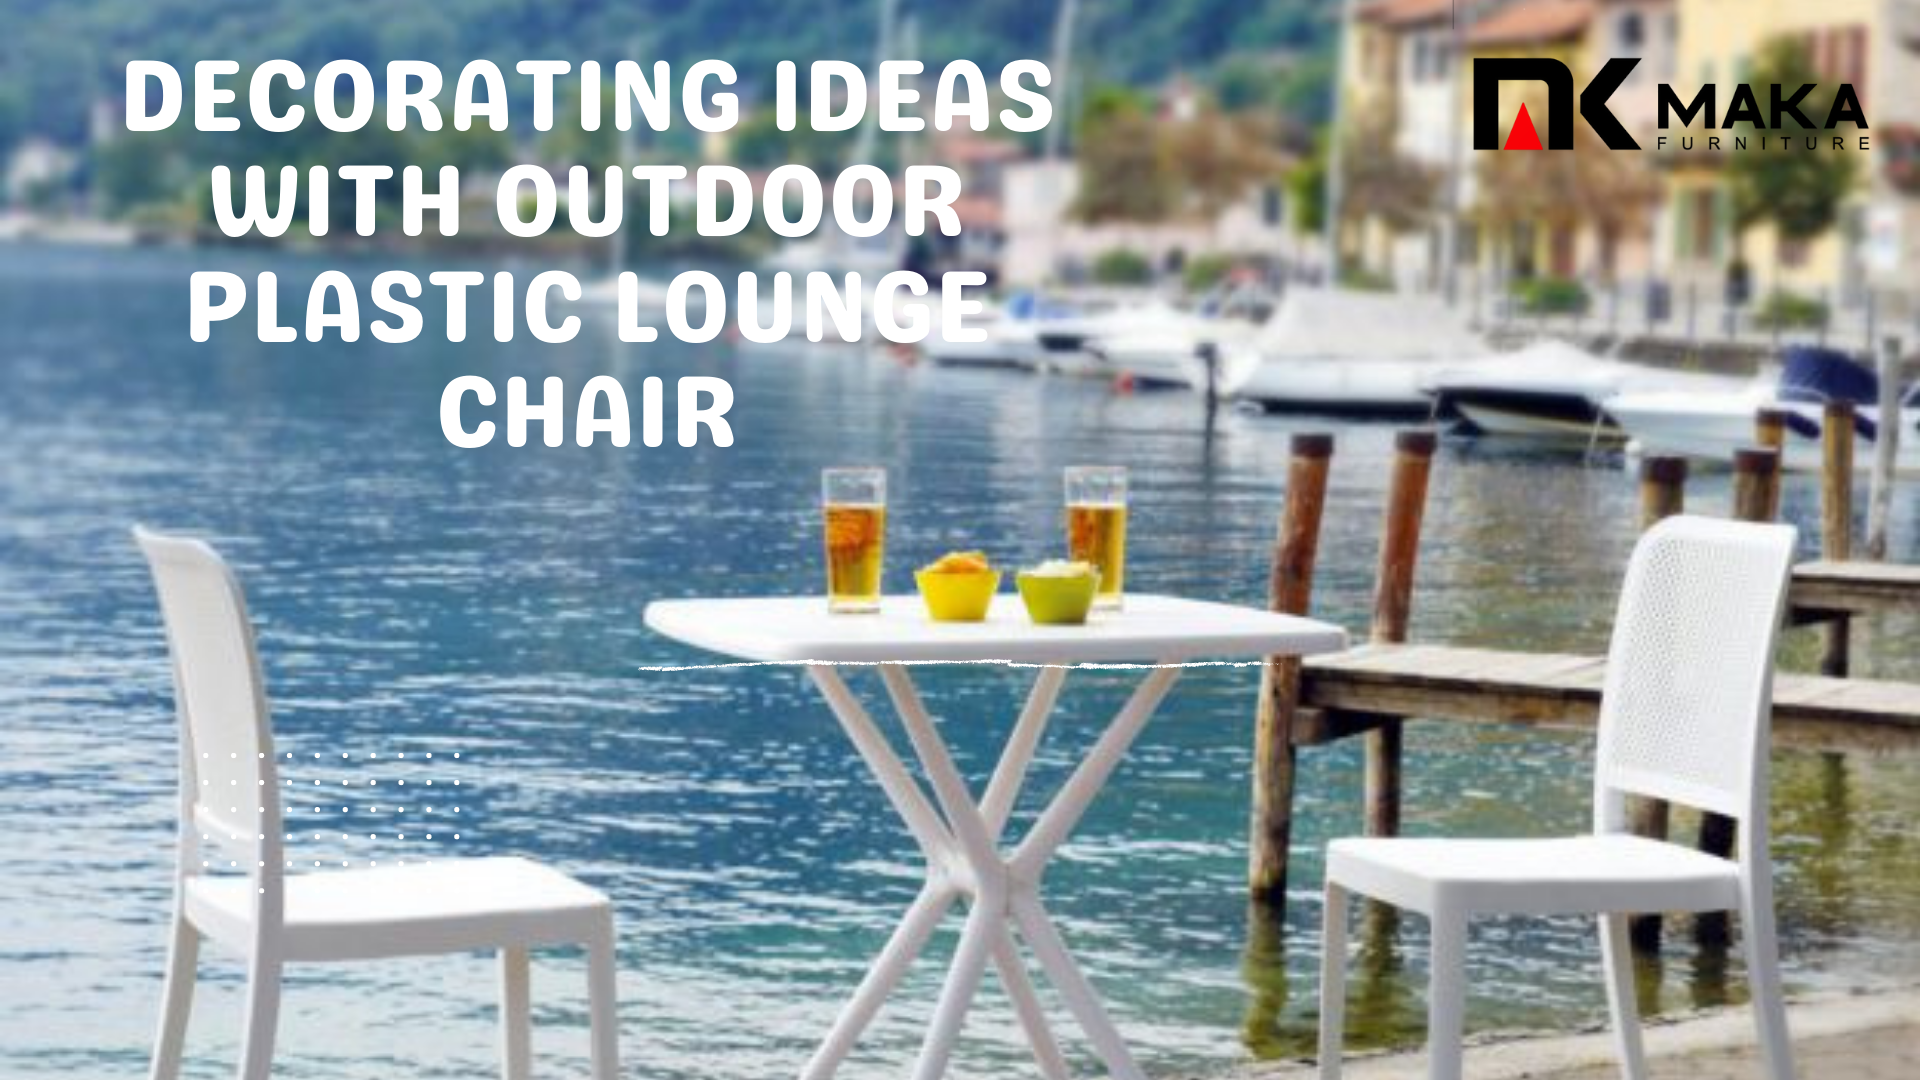 Decorating Ideas with Outdoor Plastic Lounge Chair